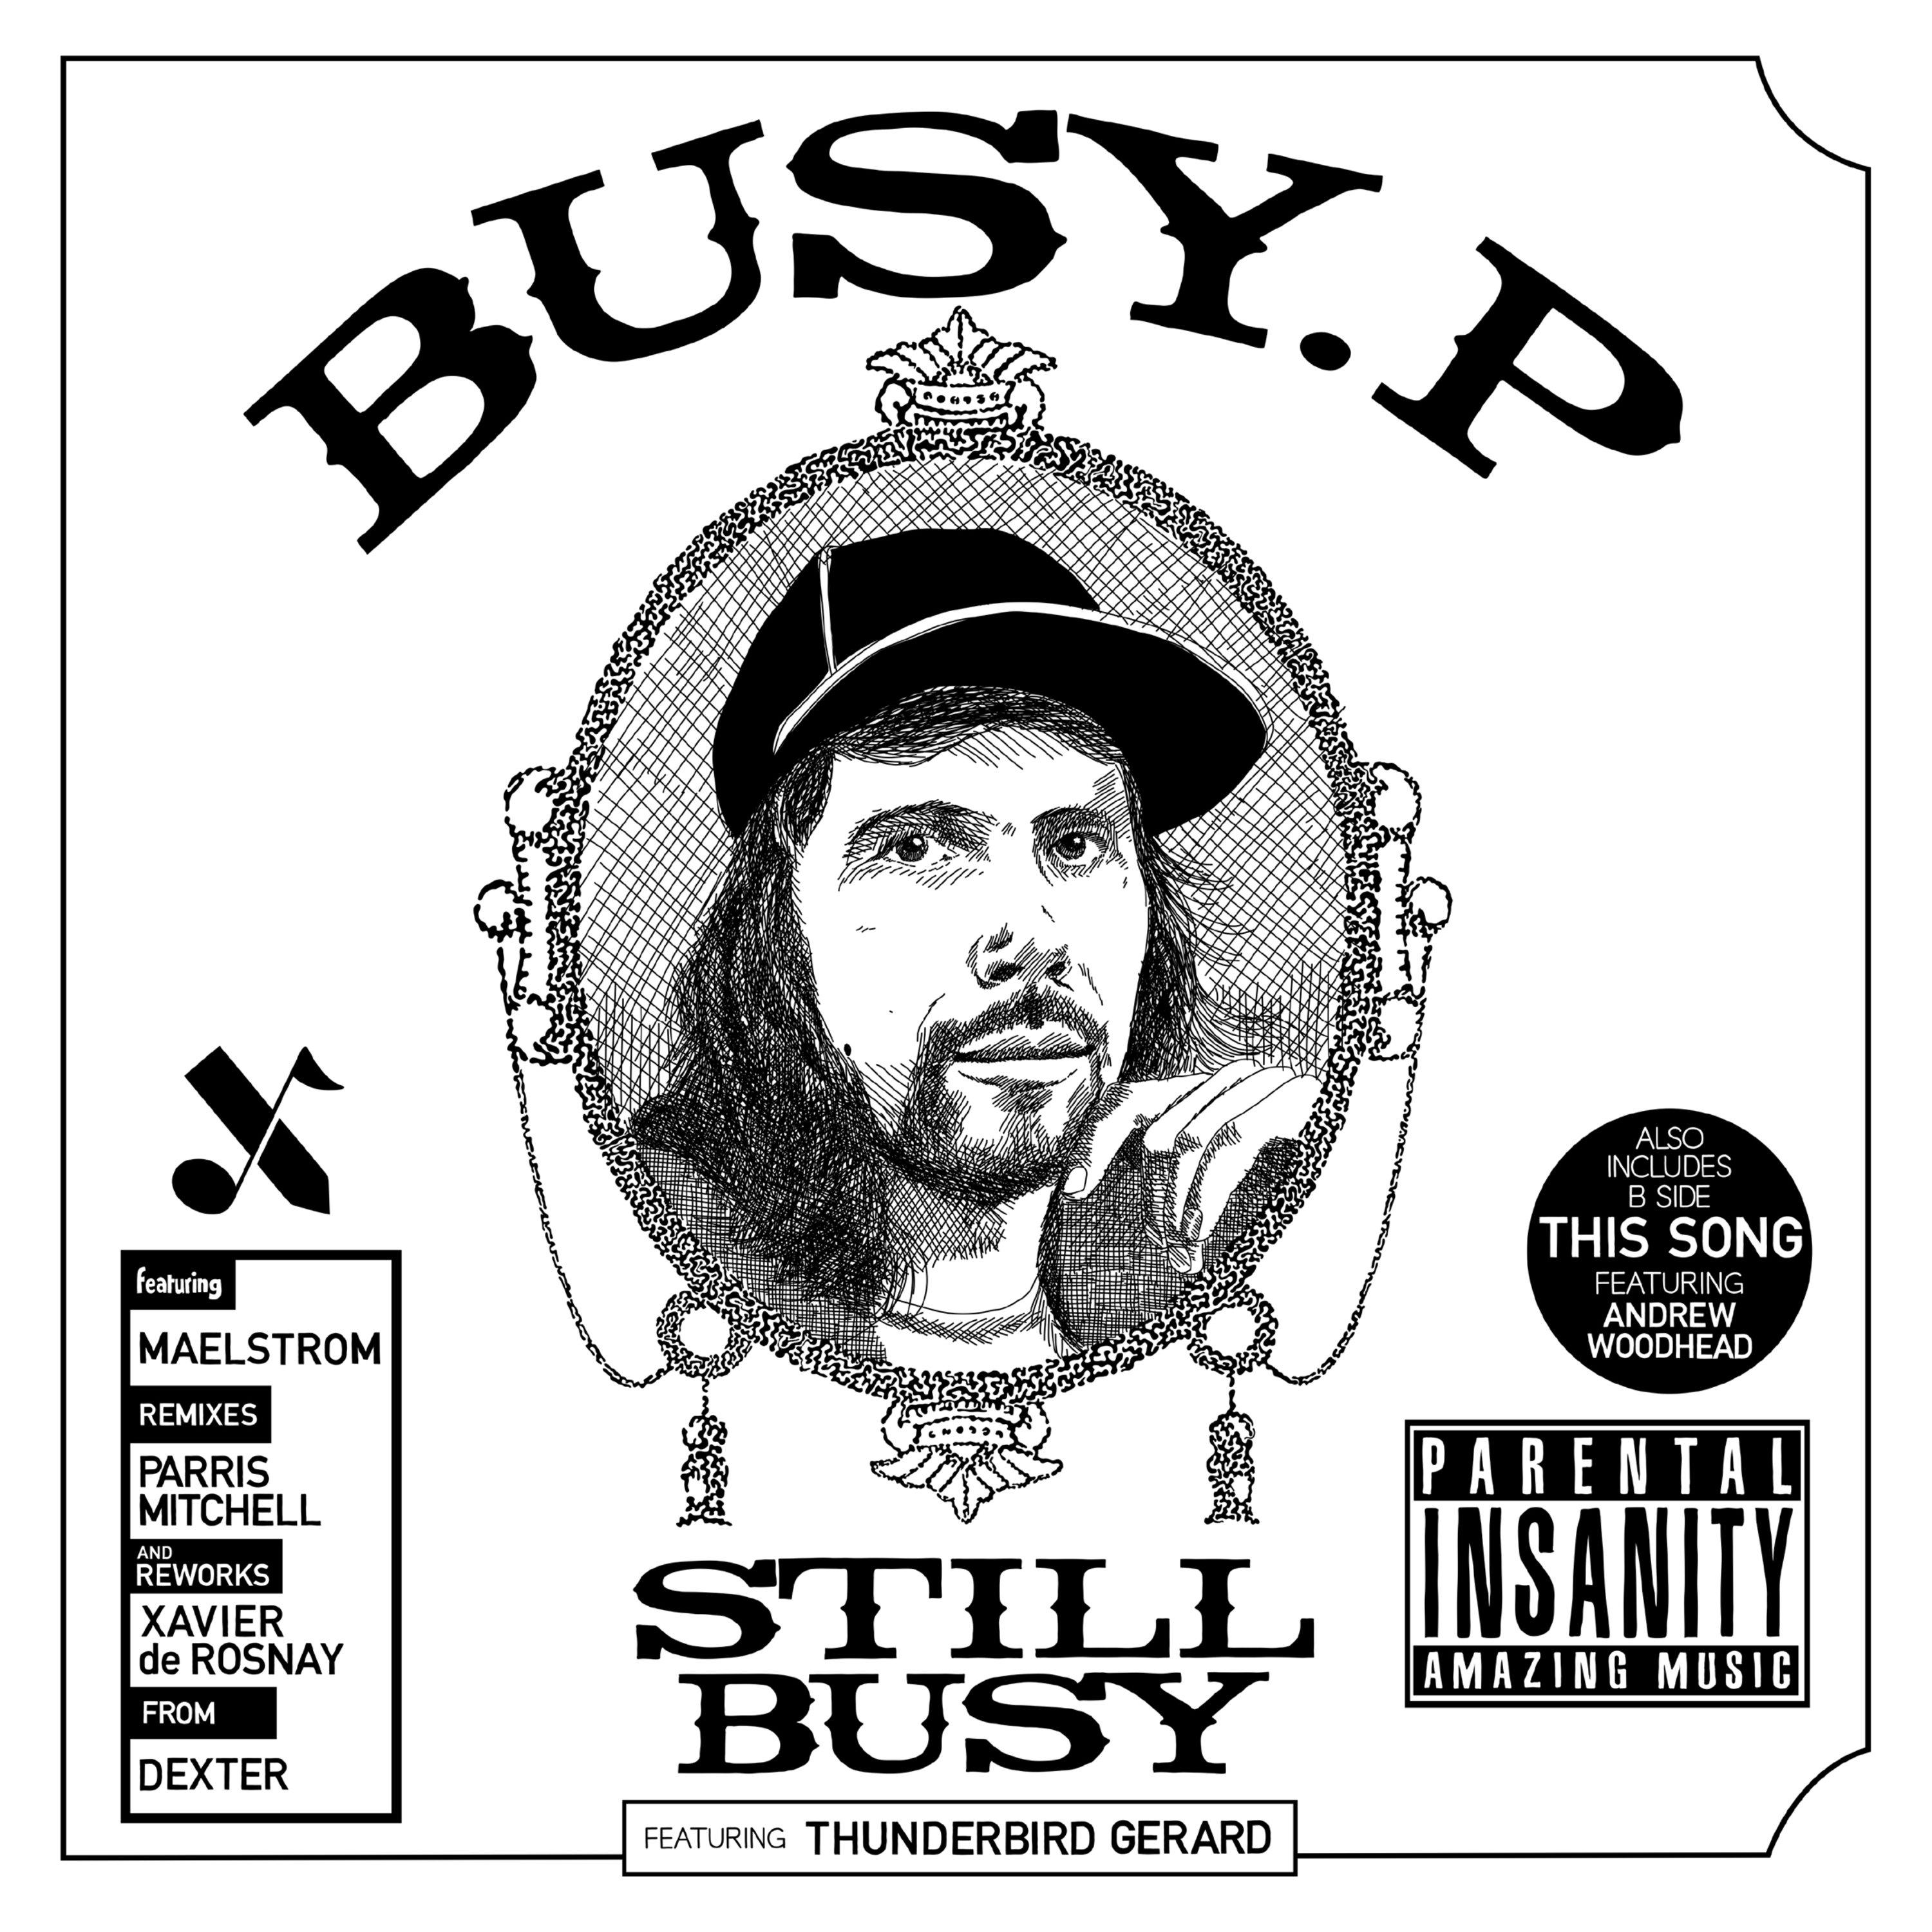 Busy P - This Song (feat. Andrew Woodhead) (Suicided by Xavier de Rosnay)